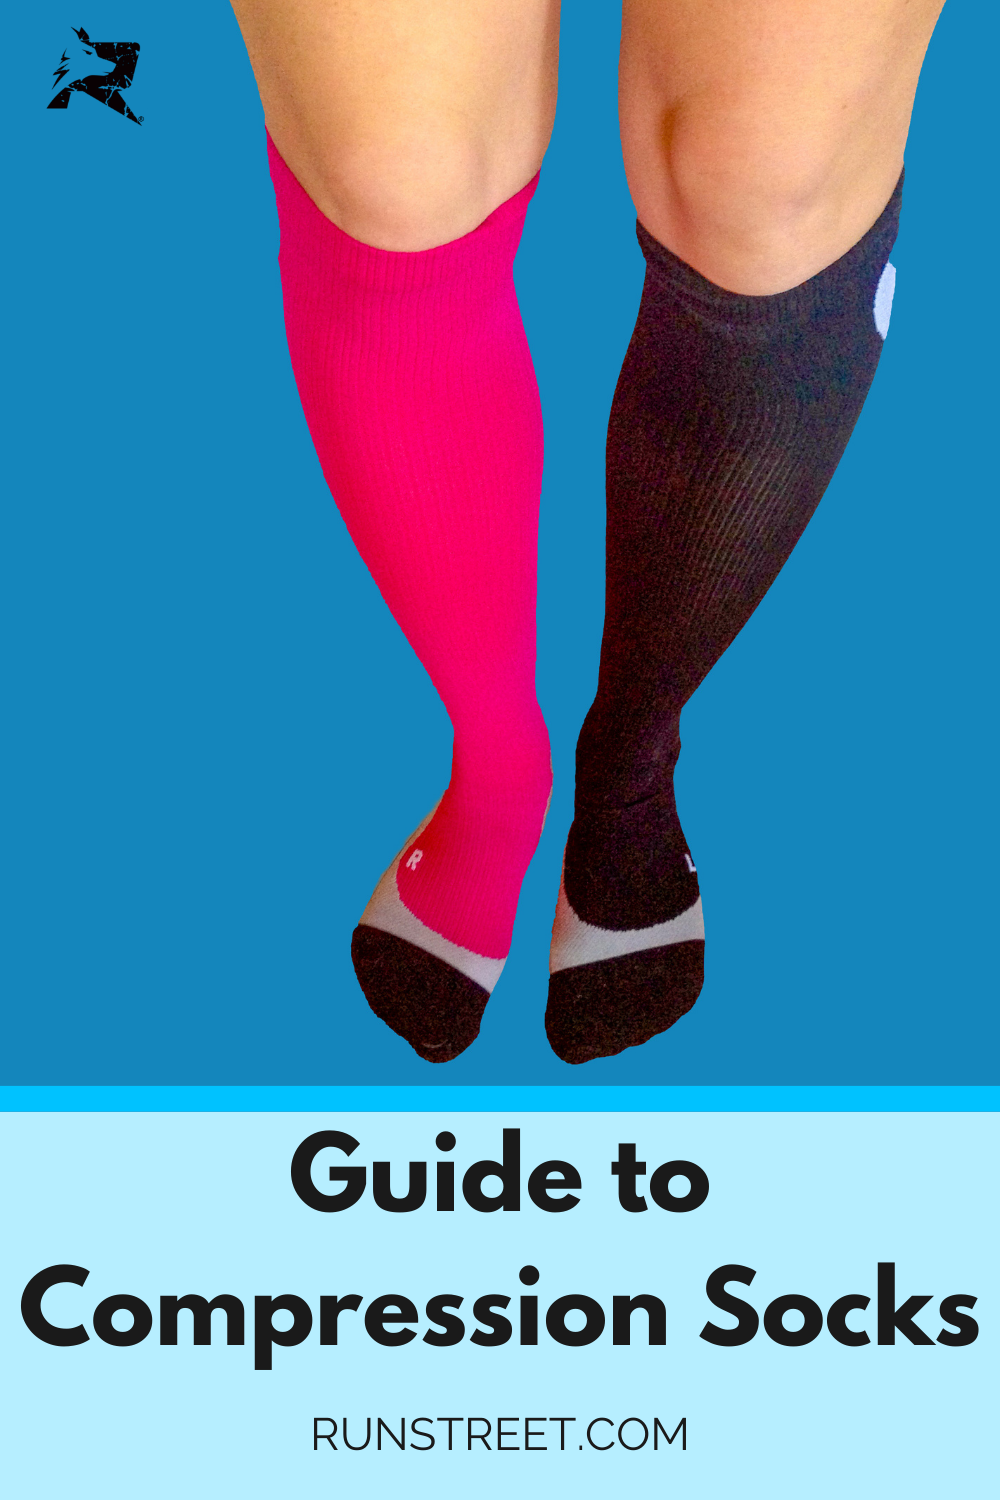 Benefits of Compression Socks For Running